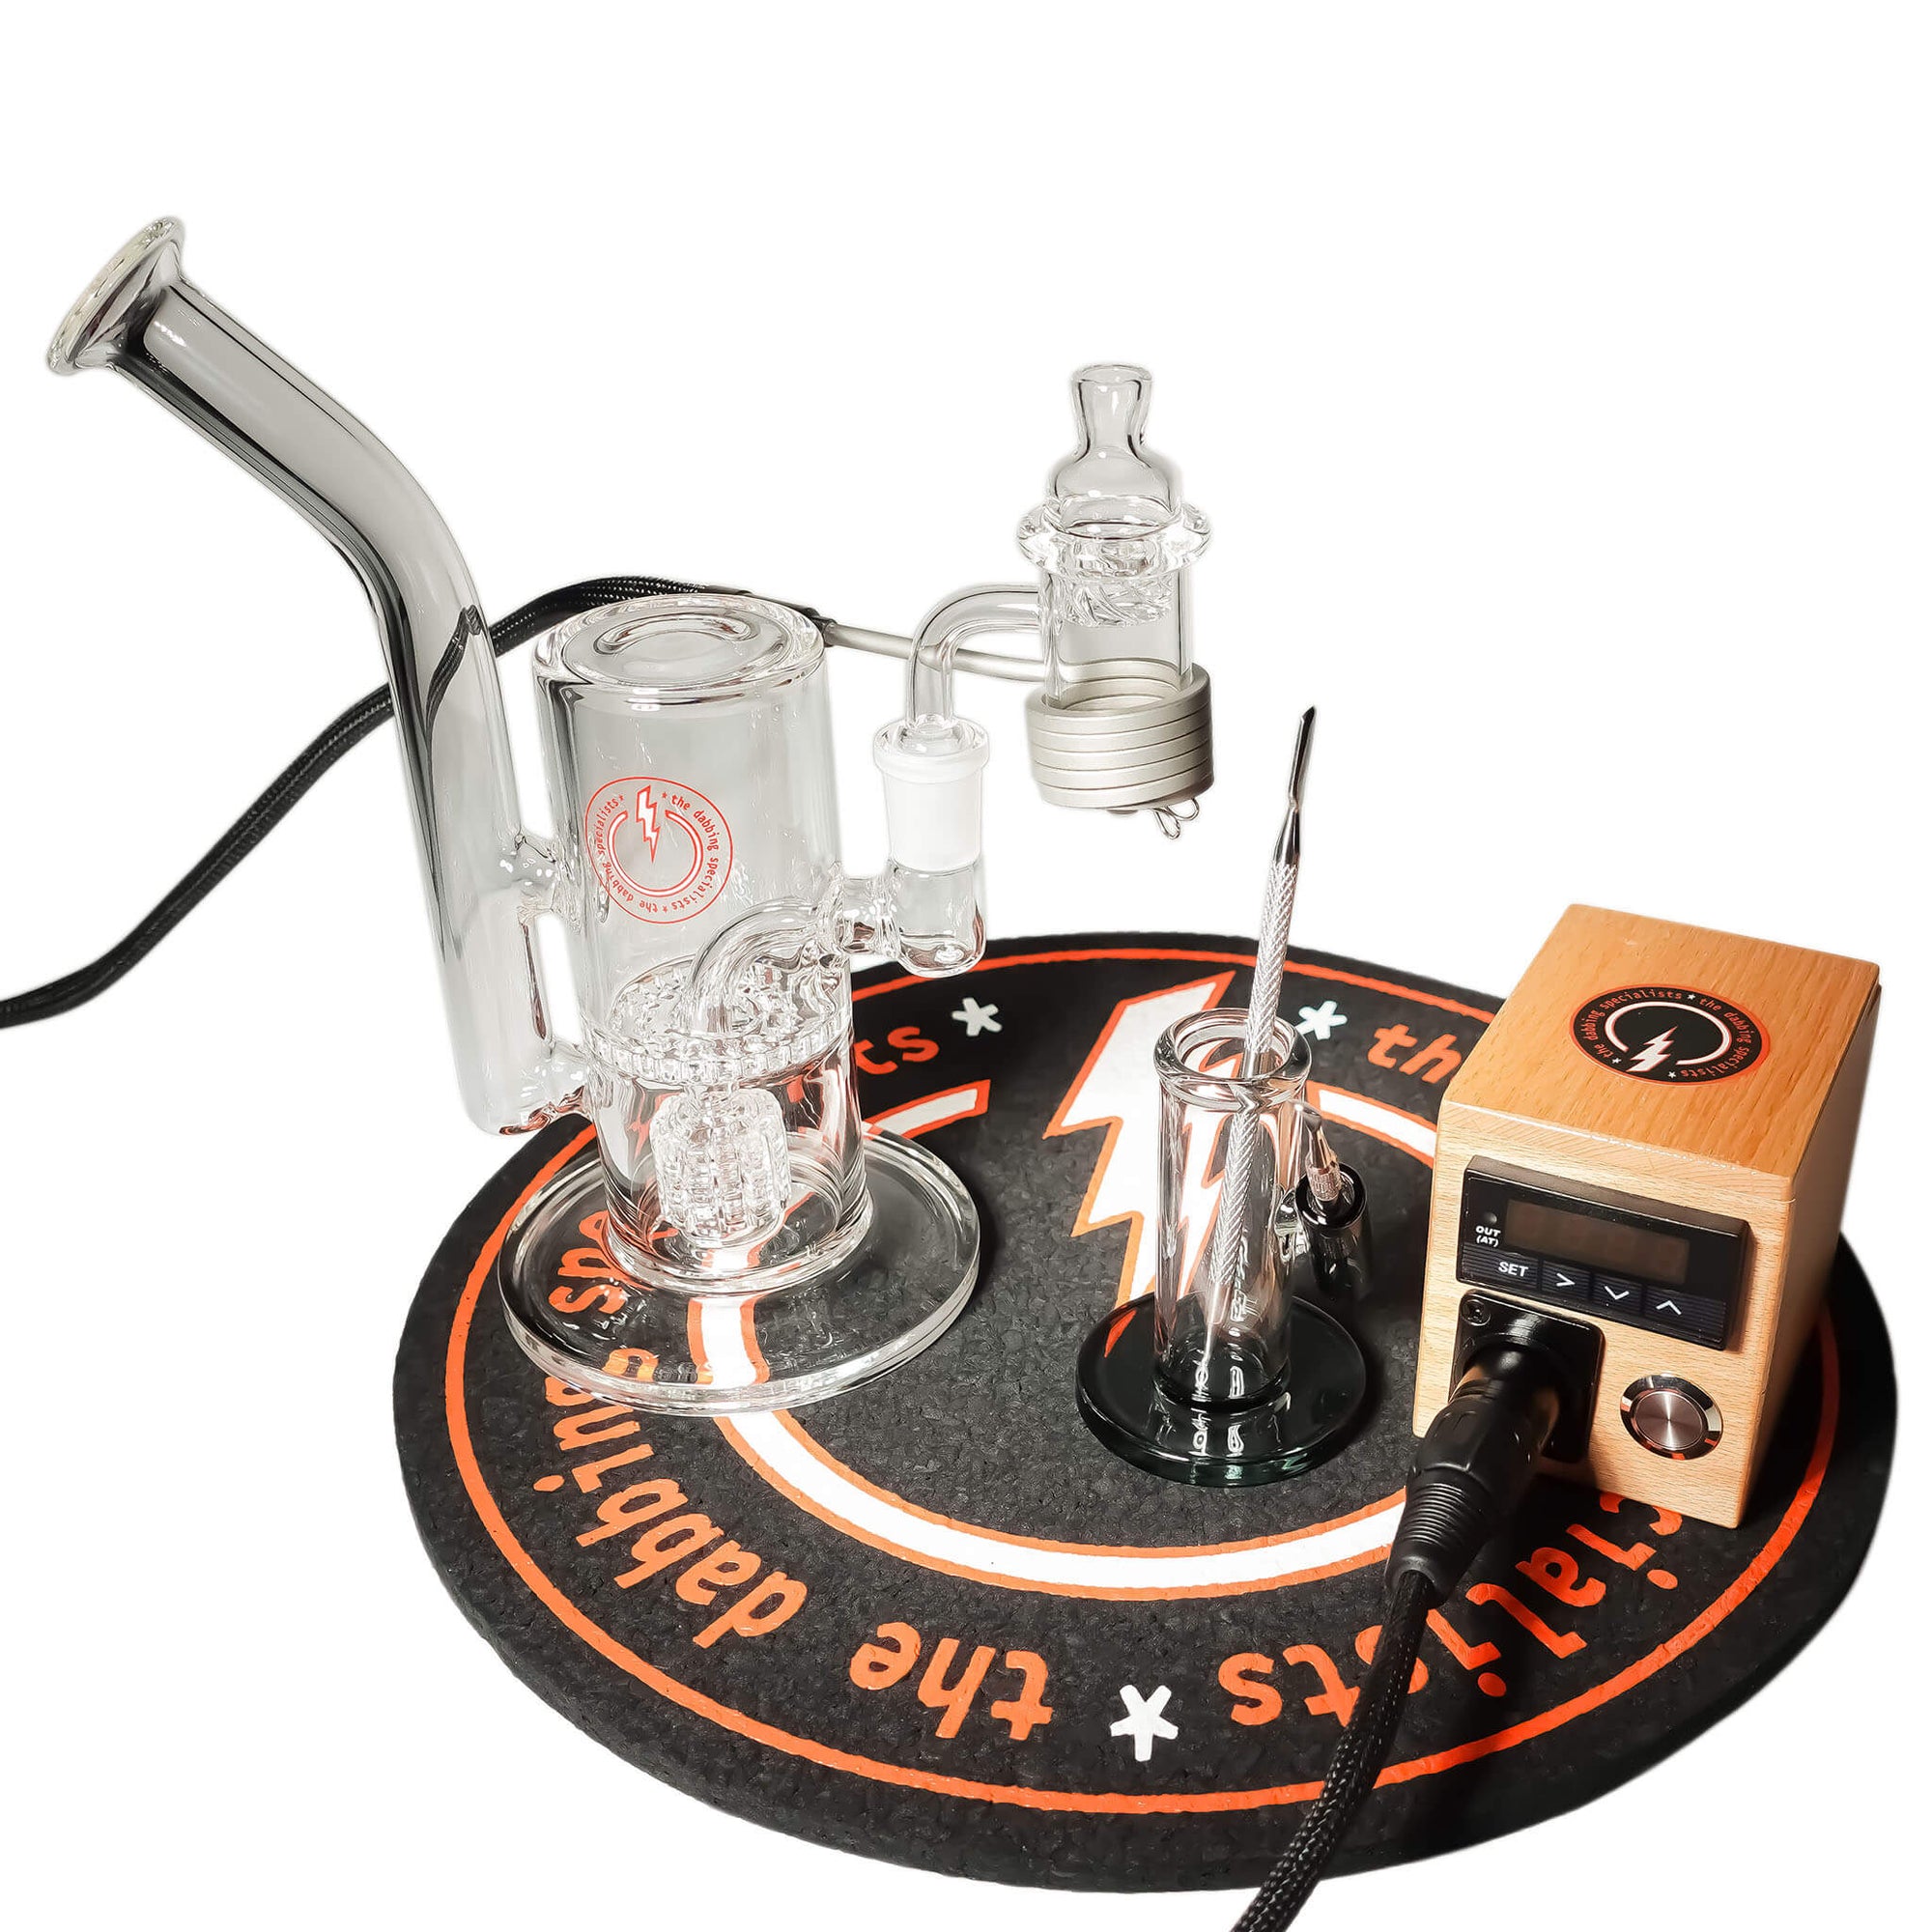 Reborn 25mm E-Banger Deluxe Enail Kit | Wood Grain Kit View | the dabbing specialists